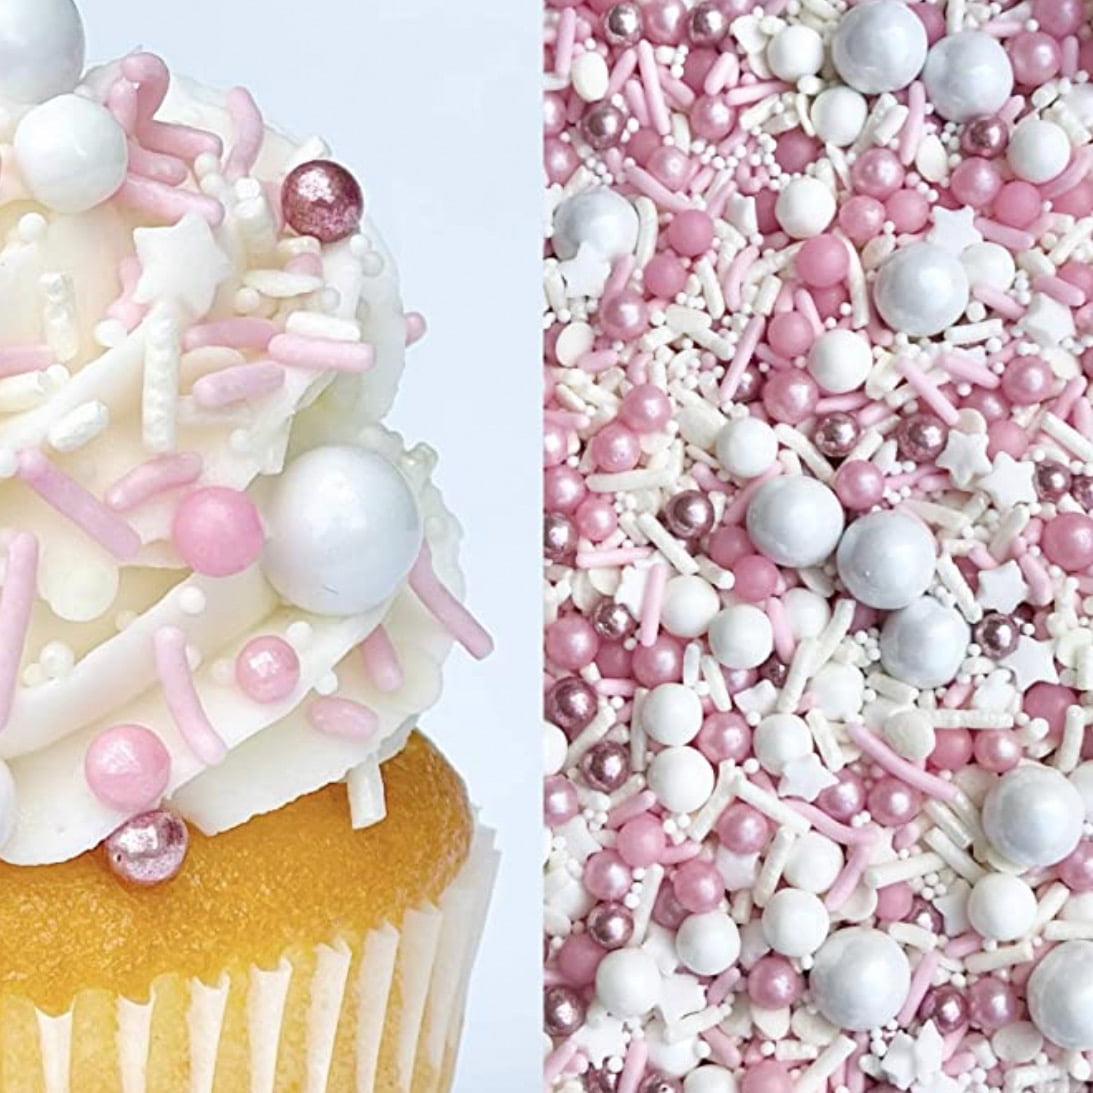 Edible Pearl Sugar Sprinkles White Candy 120g/ 4.2oz Baking Edible Cake  Decorations Cupcake Toppers Cookie Decorating Ice Cream Toppings  Celebrations